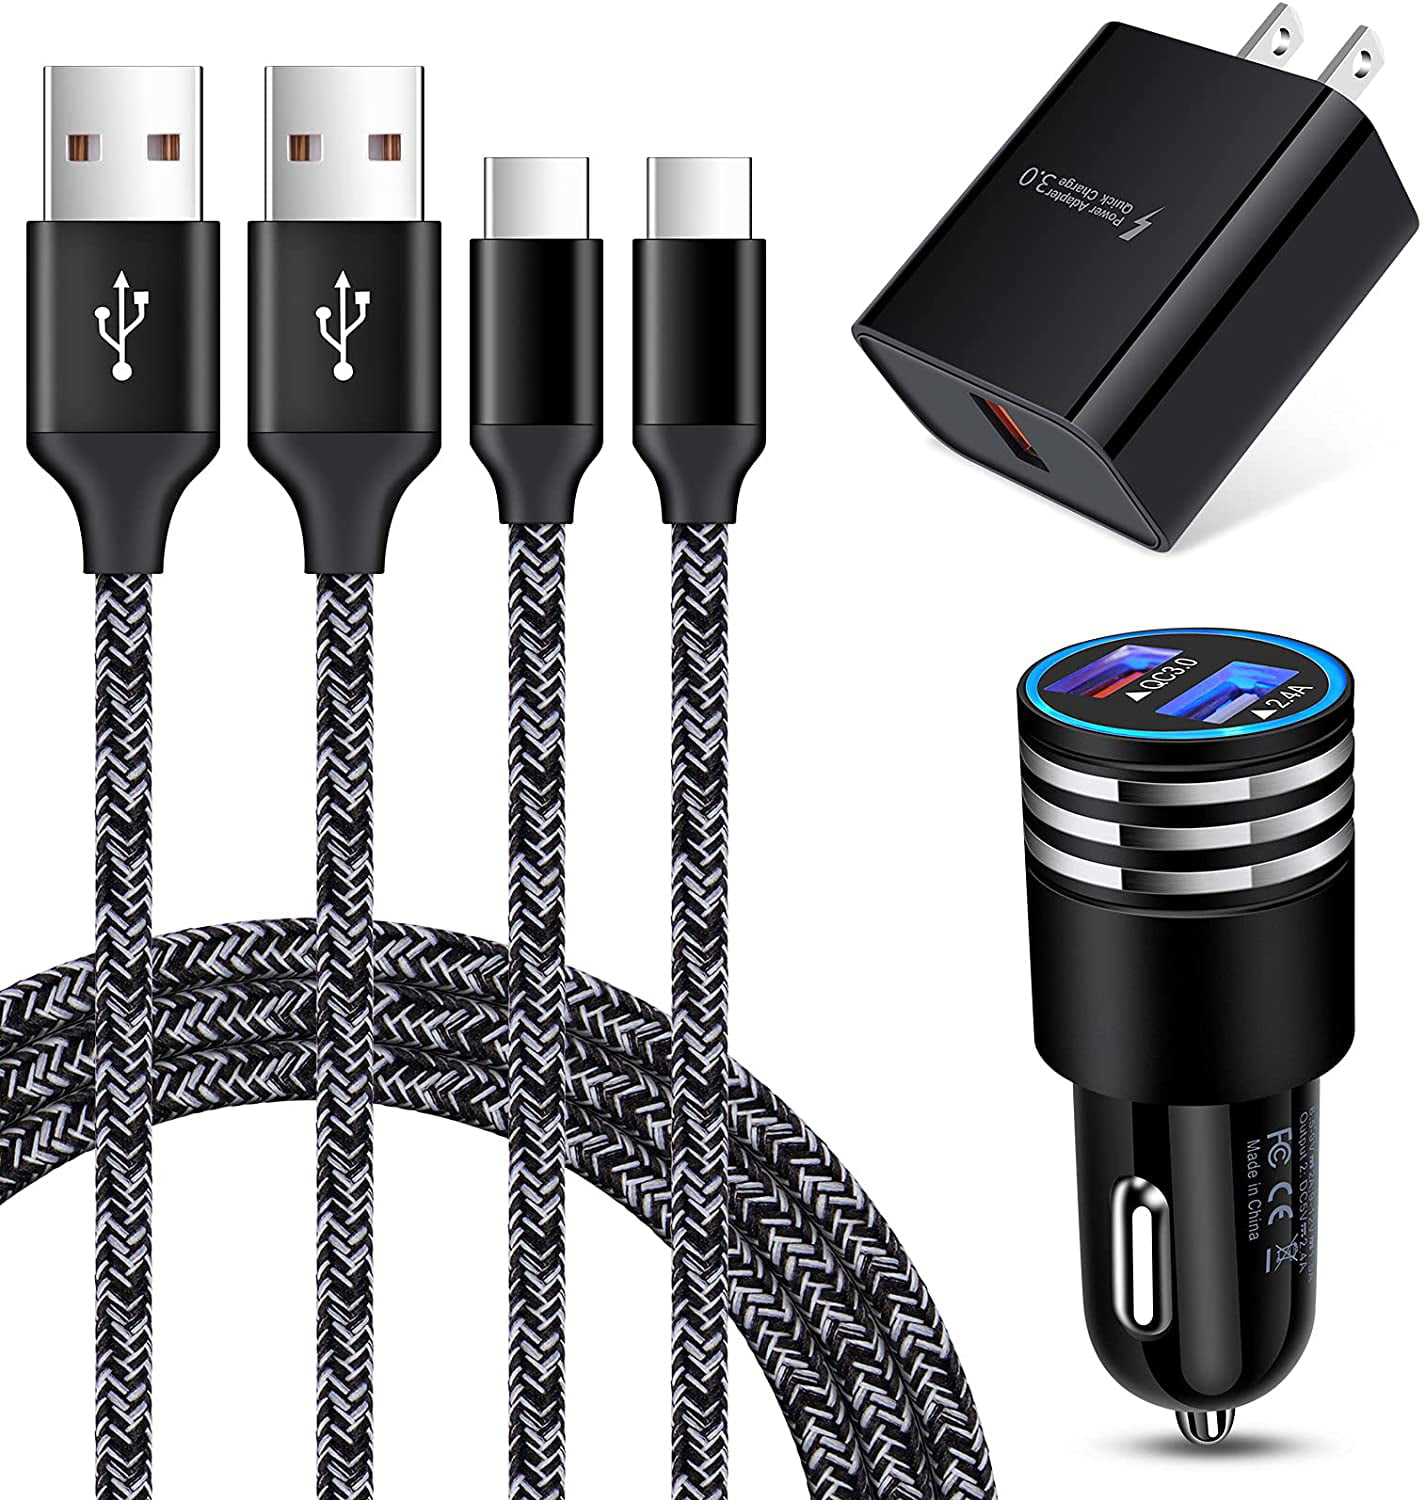 PRO 15W USB-C Car KIT Works for LG G8X ThinQ with Long Durable 6Ft Cable! CE UL Certified 